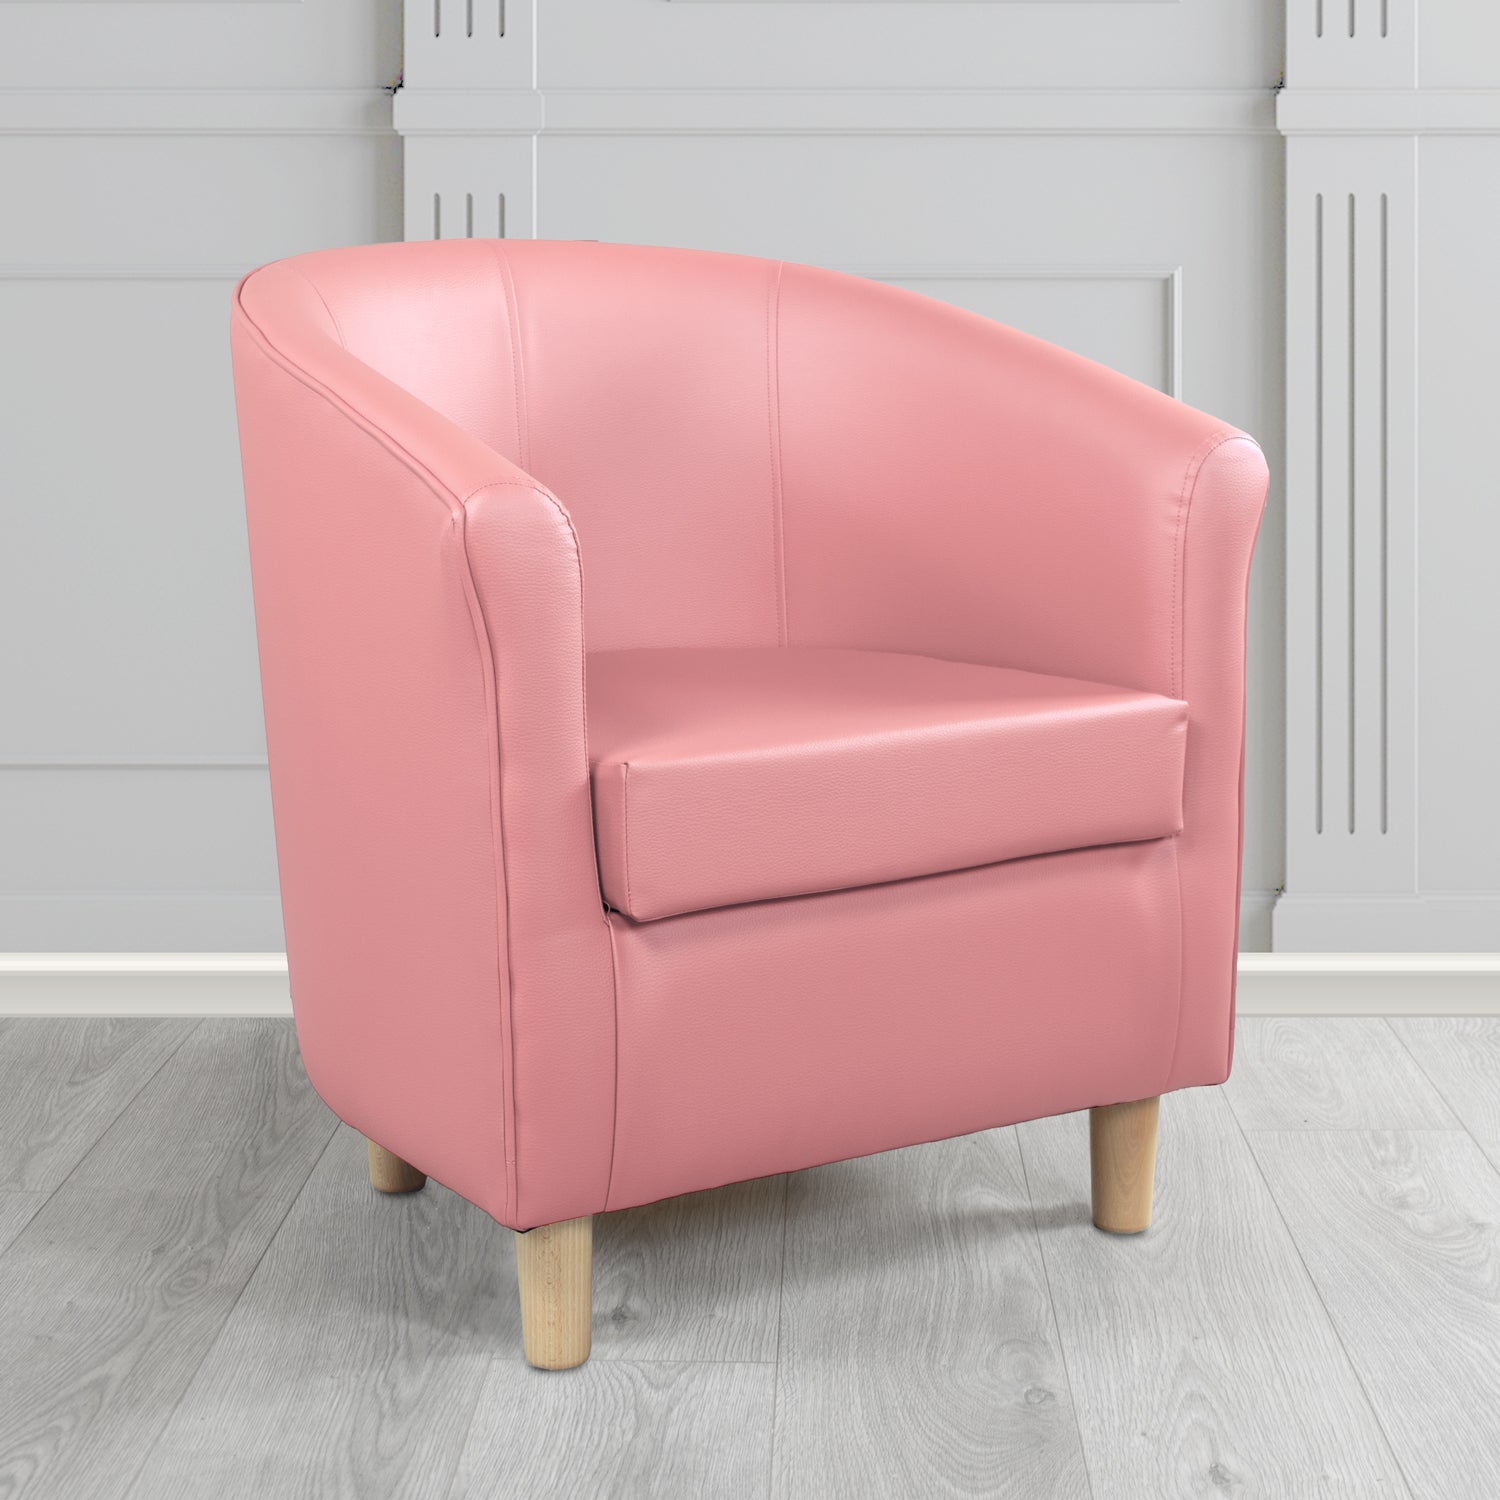 Tuscany Just Colour Cherry Blossom Antimicrobial Crib 5 Contract Faux Leather Tub Chair - The Tub Chair Shop